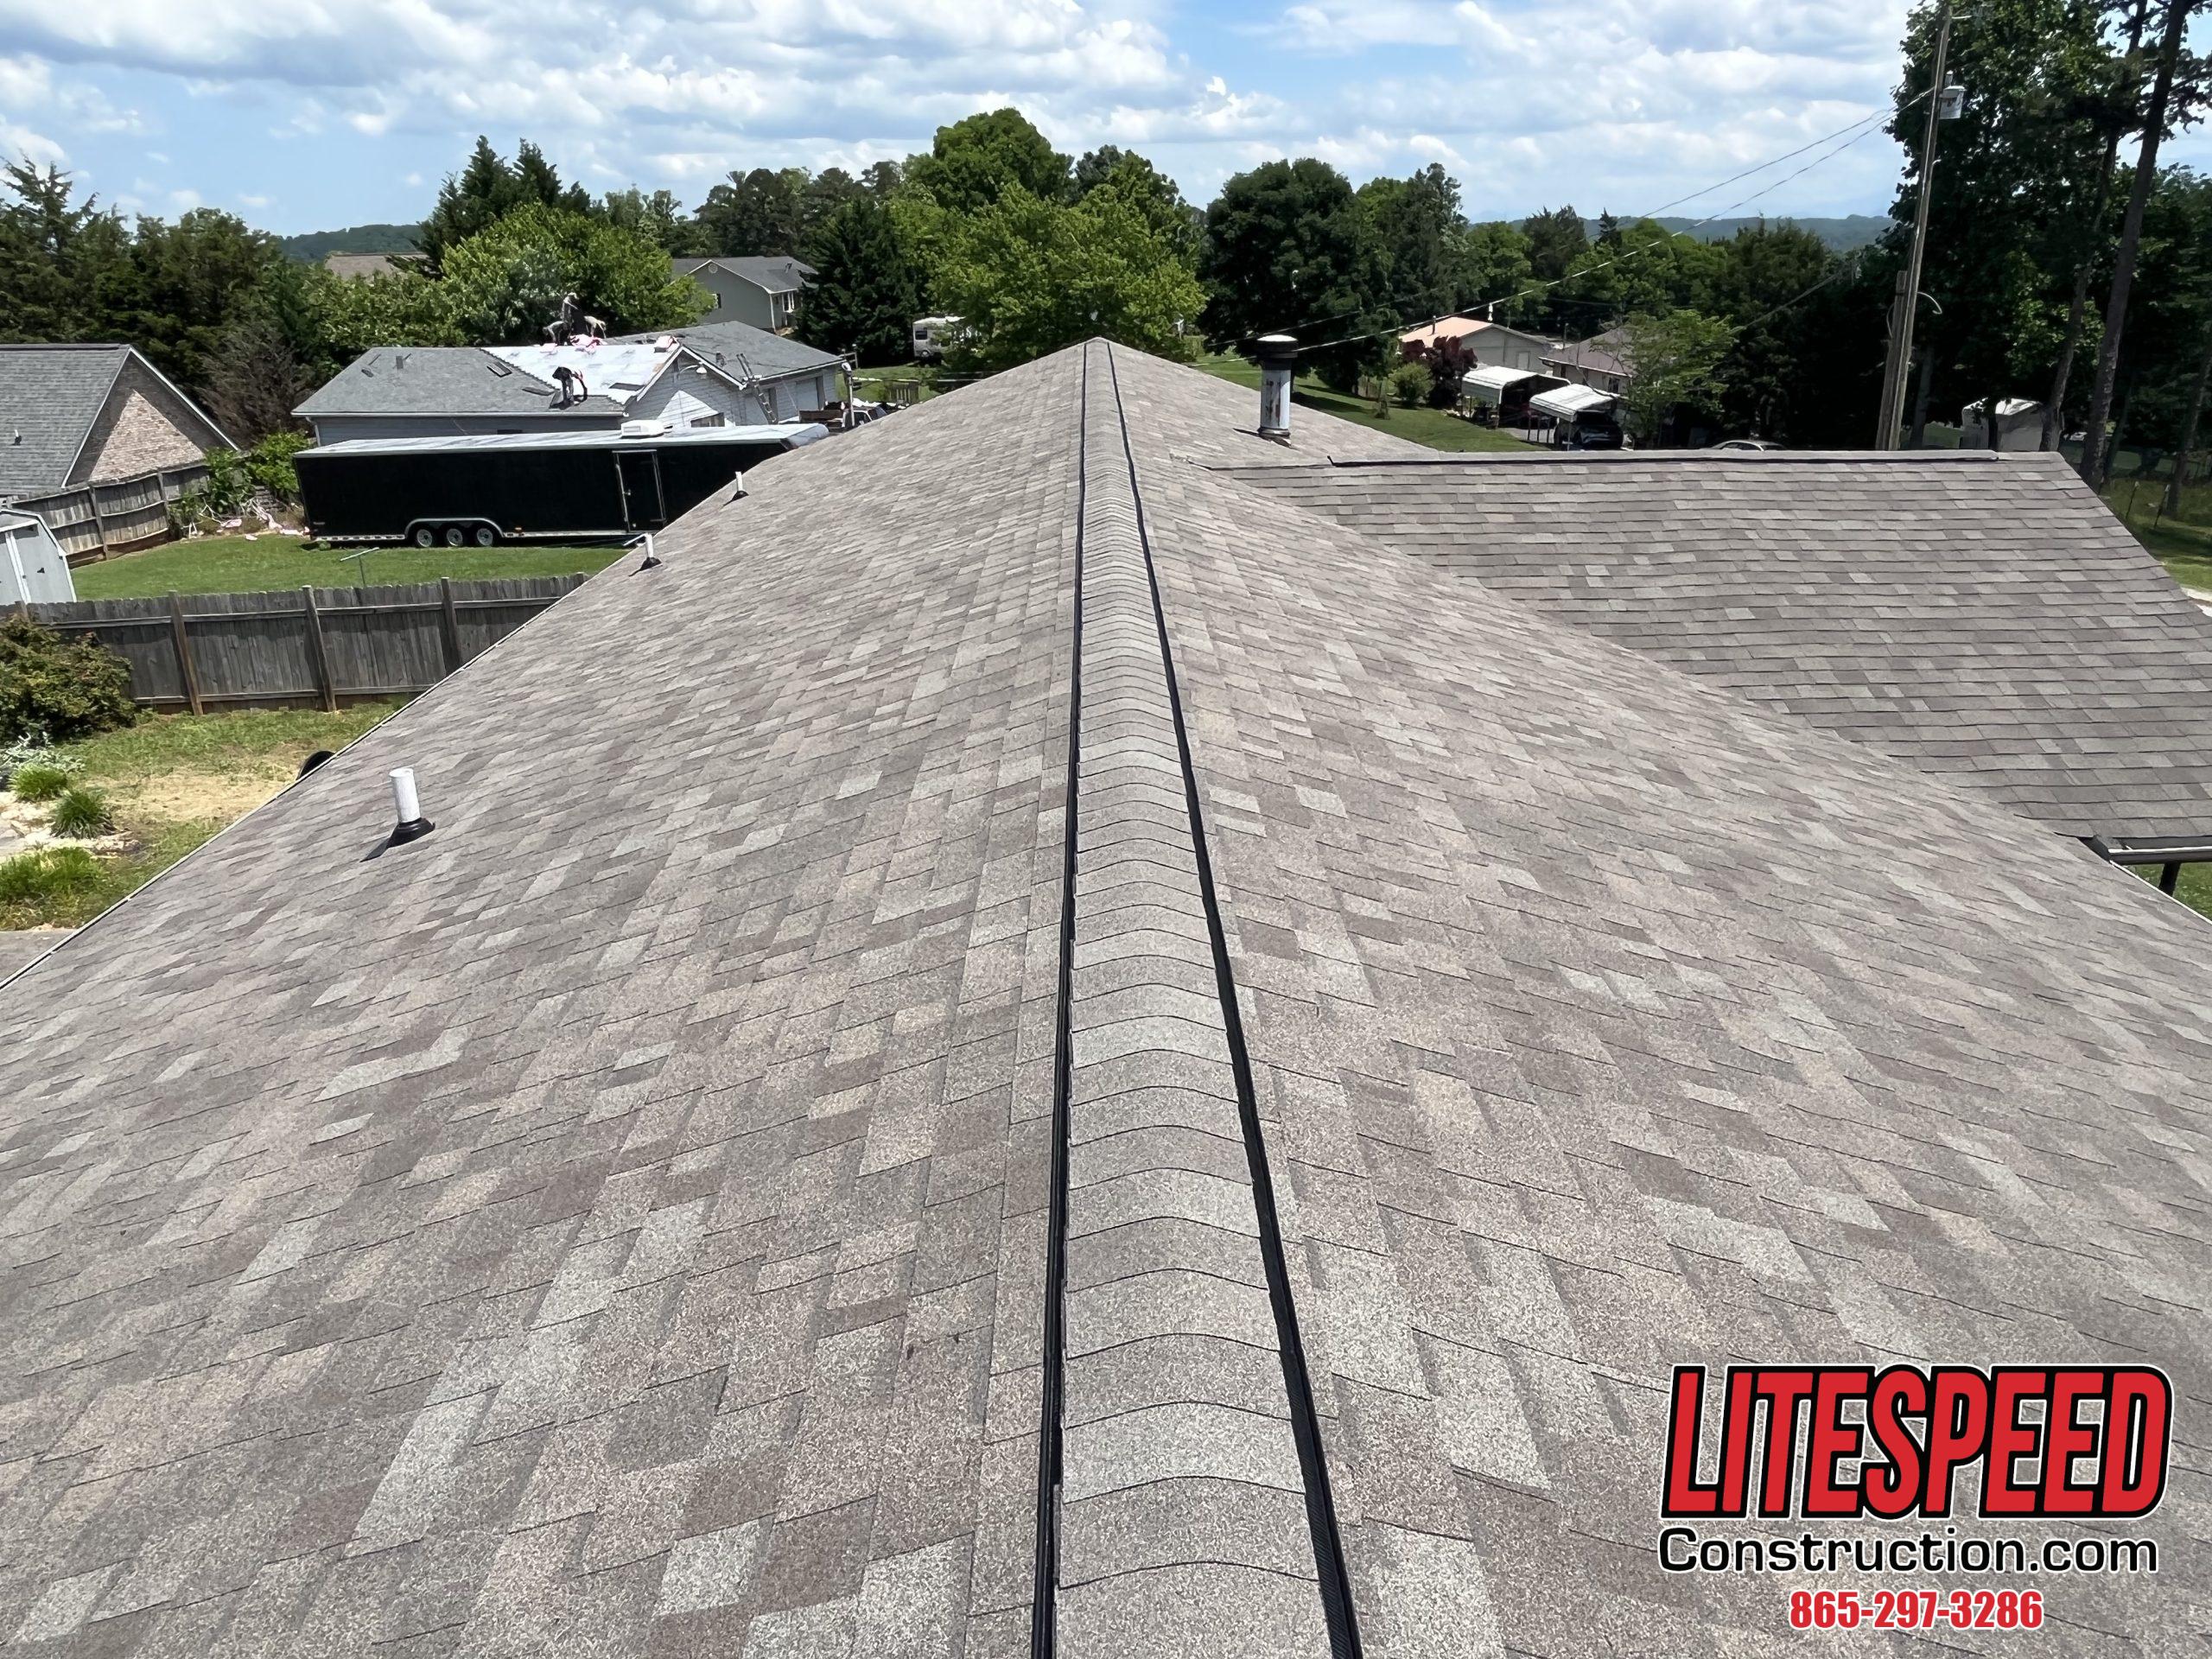 This is a picture of a new roof with light brown shingles